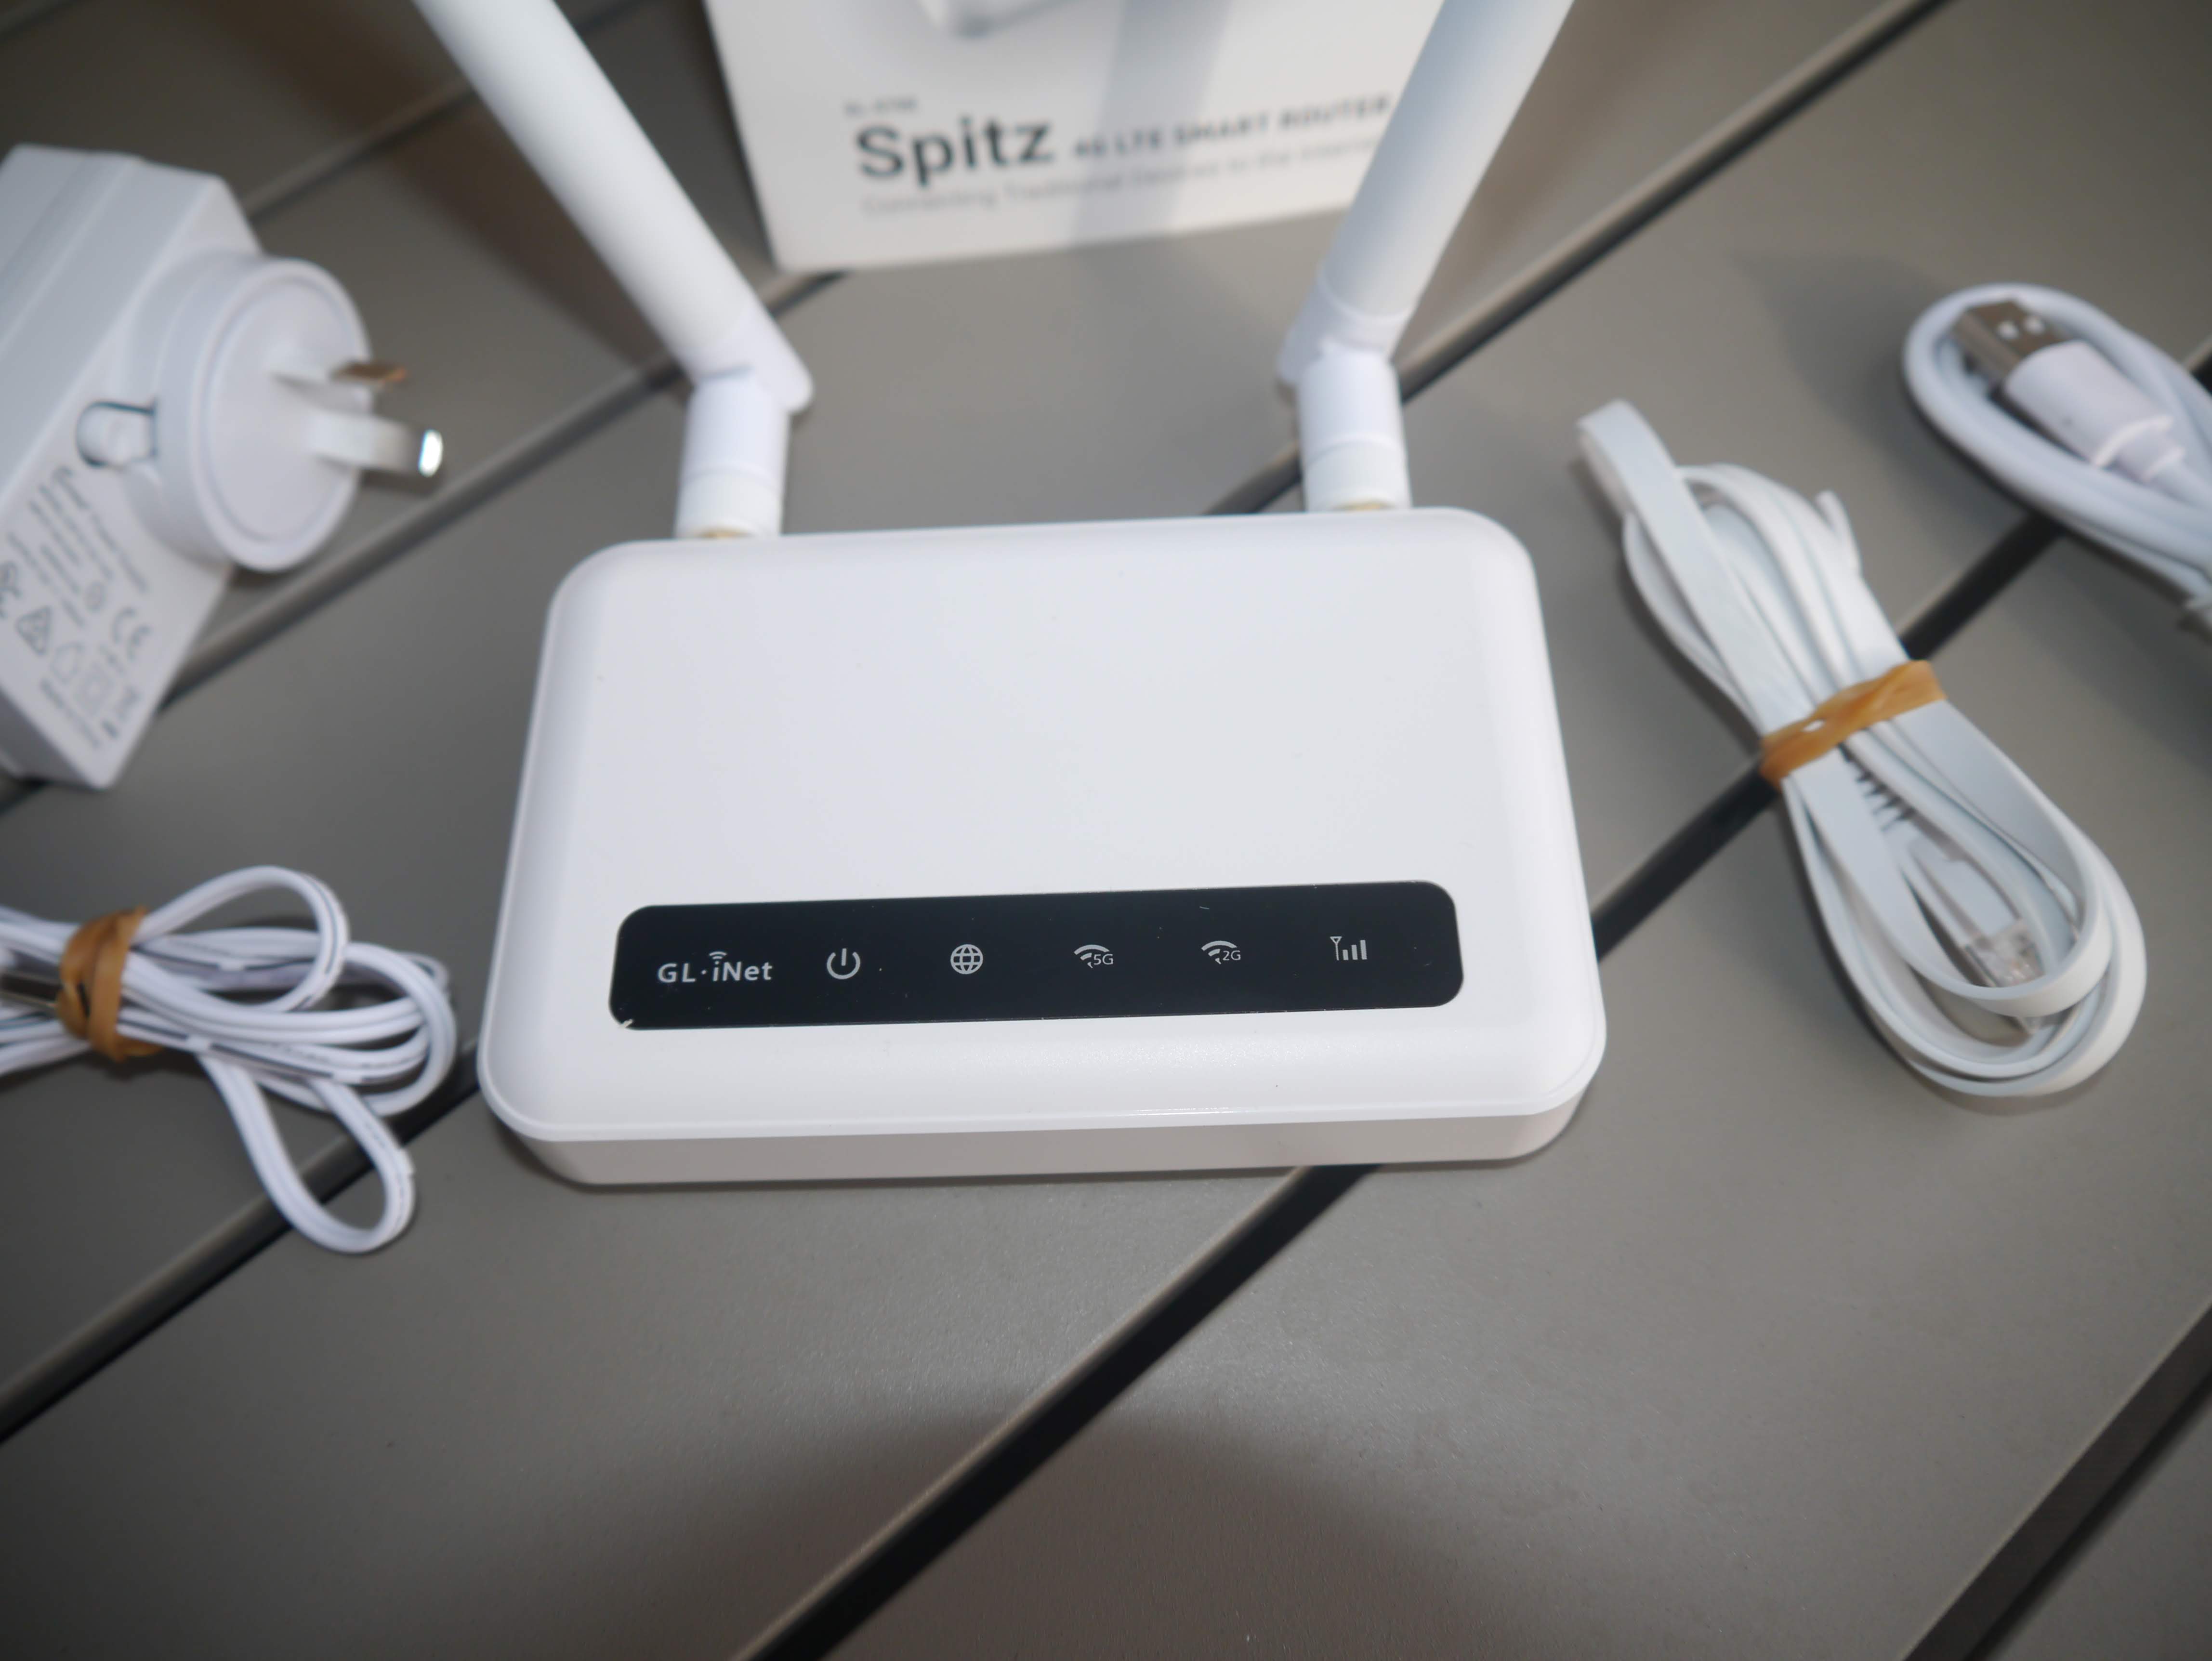 Gl.net Spitz V2 4G LTE Wireless Router Review: Country Roads